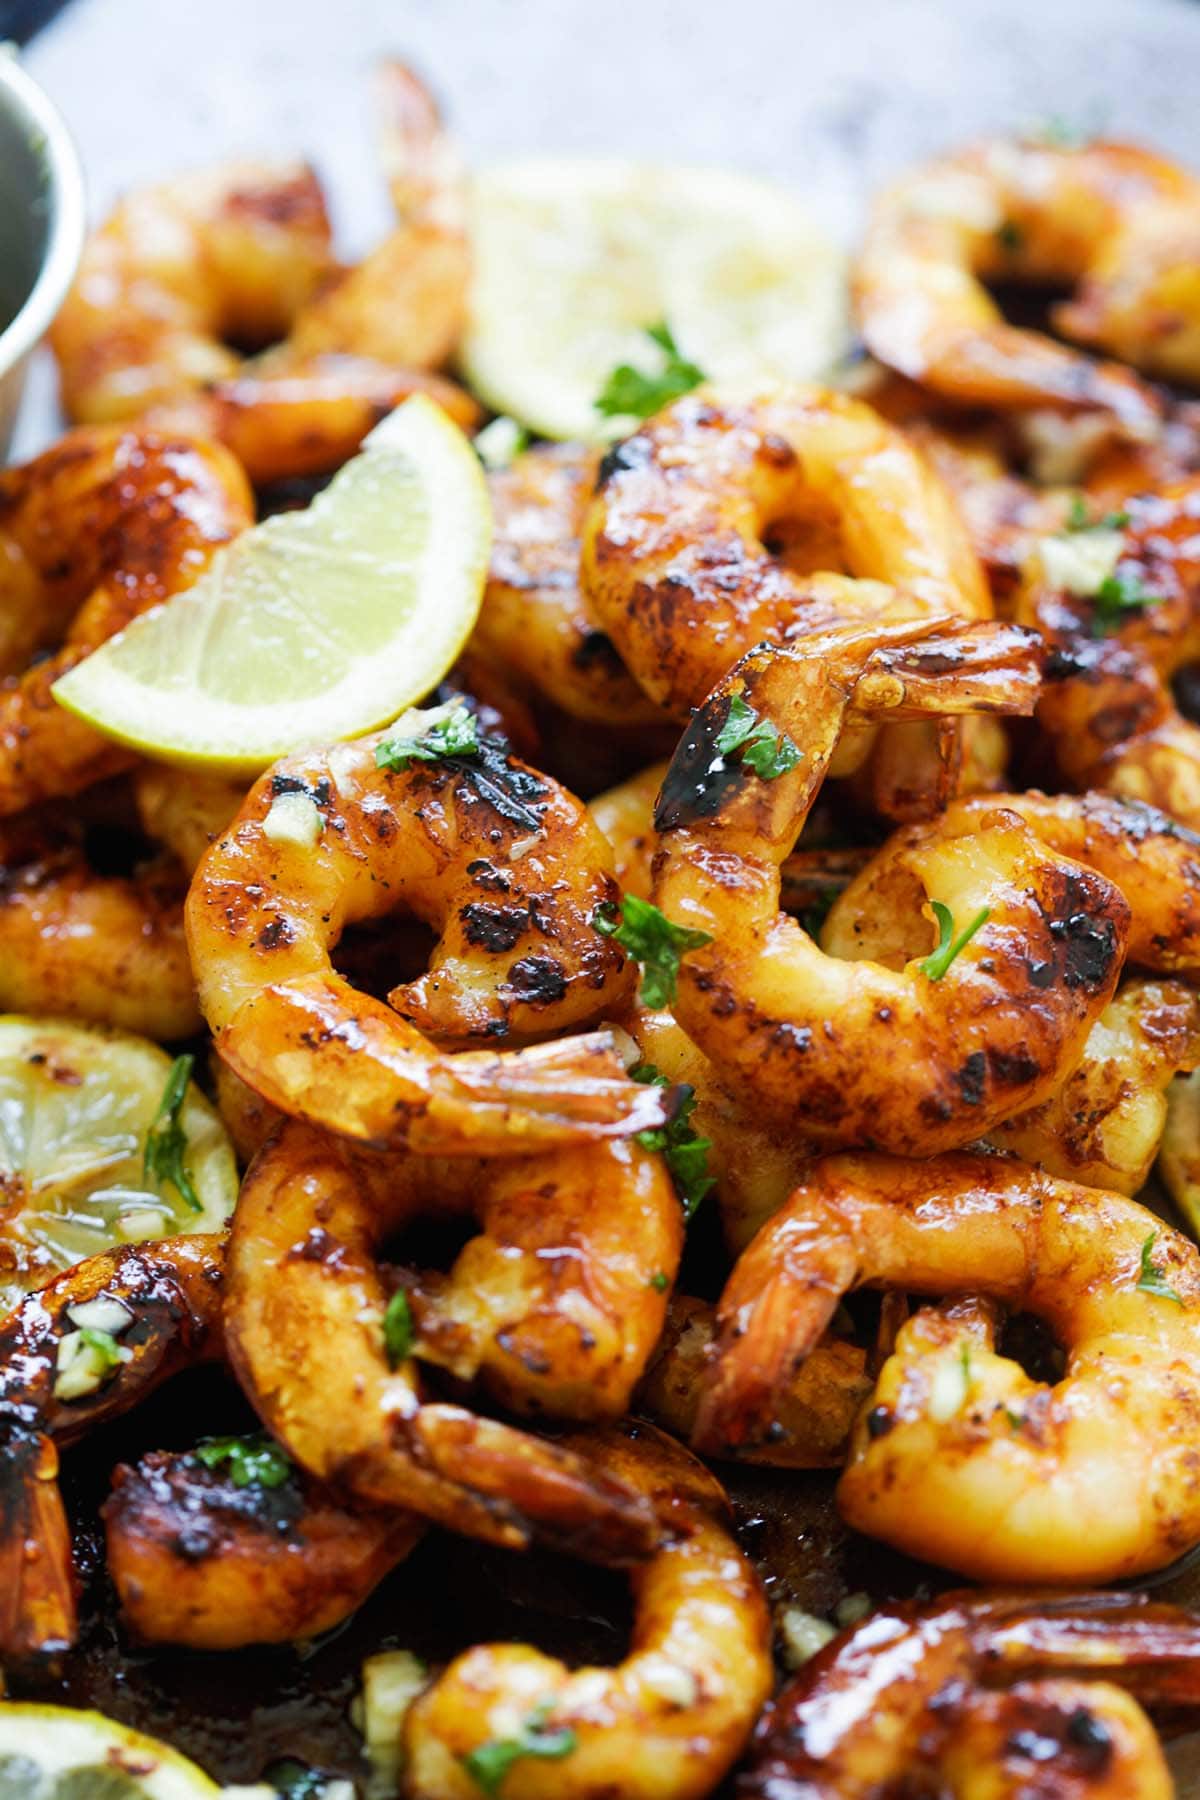 Grilled shrimp with cajun spices and honey, ready to serve.